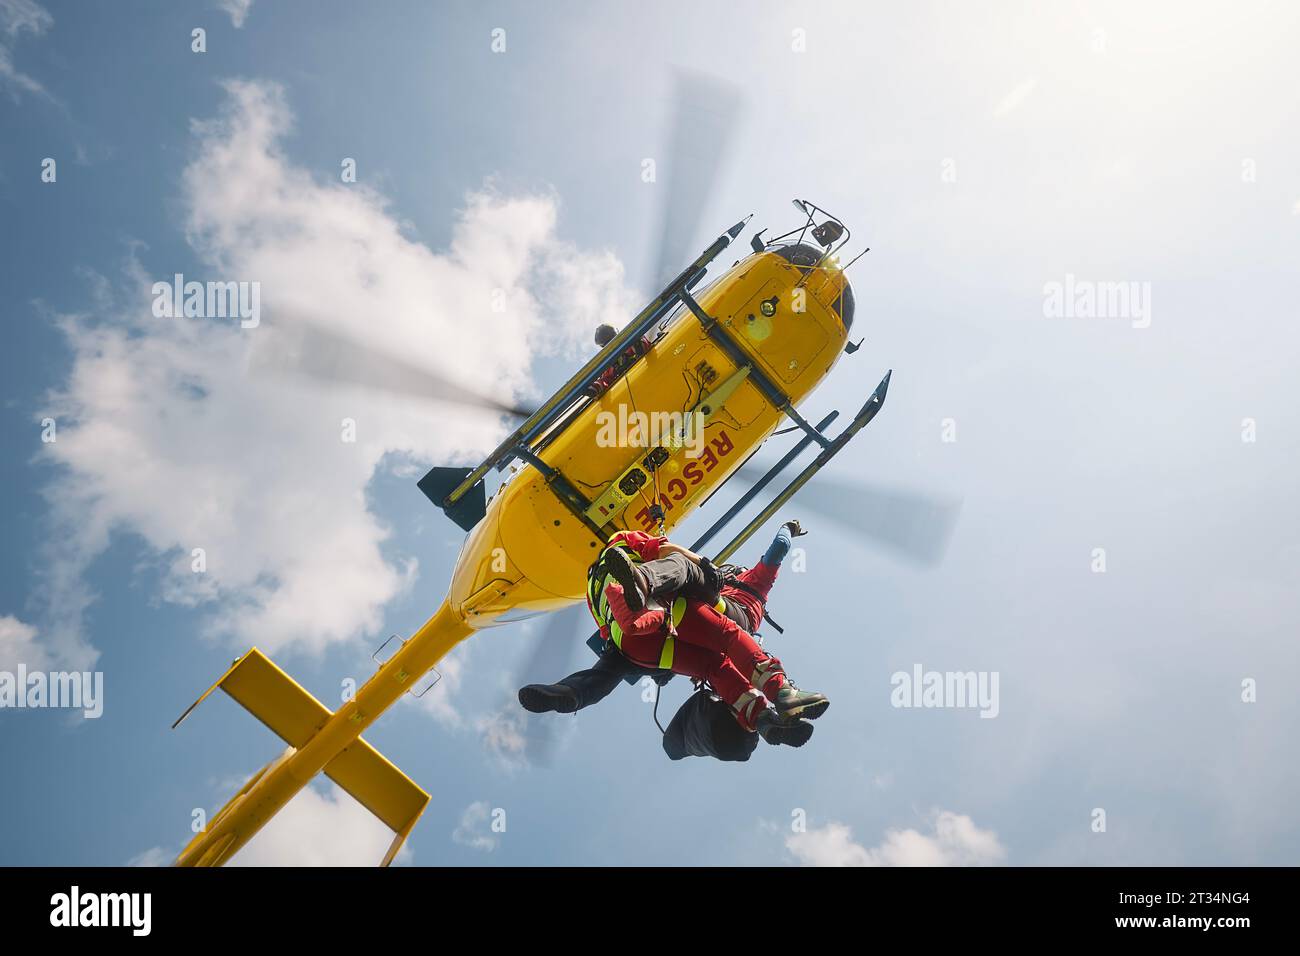 Two paramedics hanging on rope under flying helicopter emergency medical service. Themes rescue, help and heroes. Stock Photo